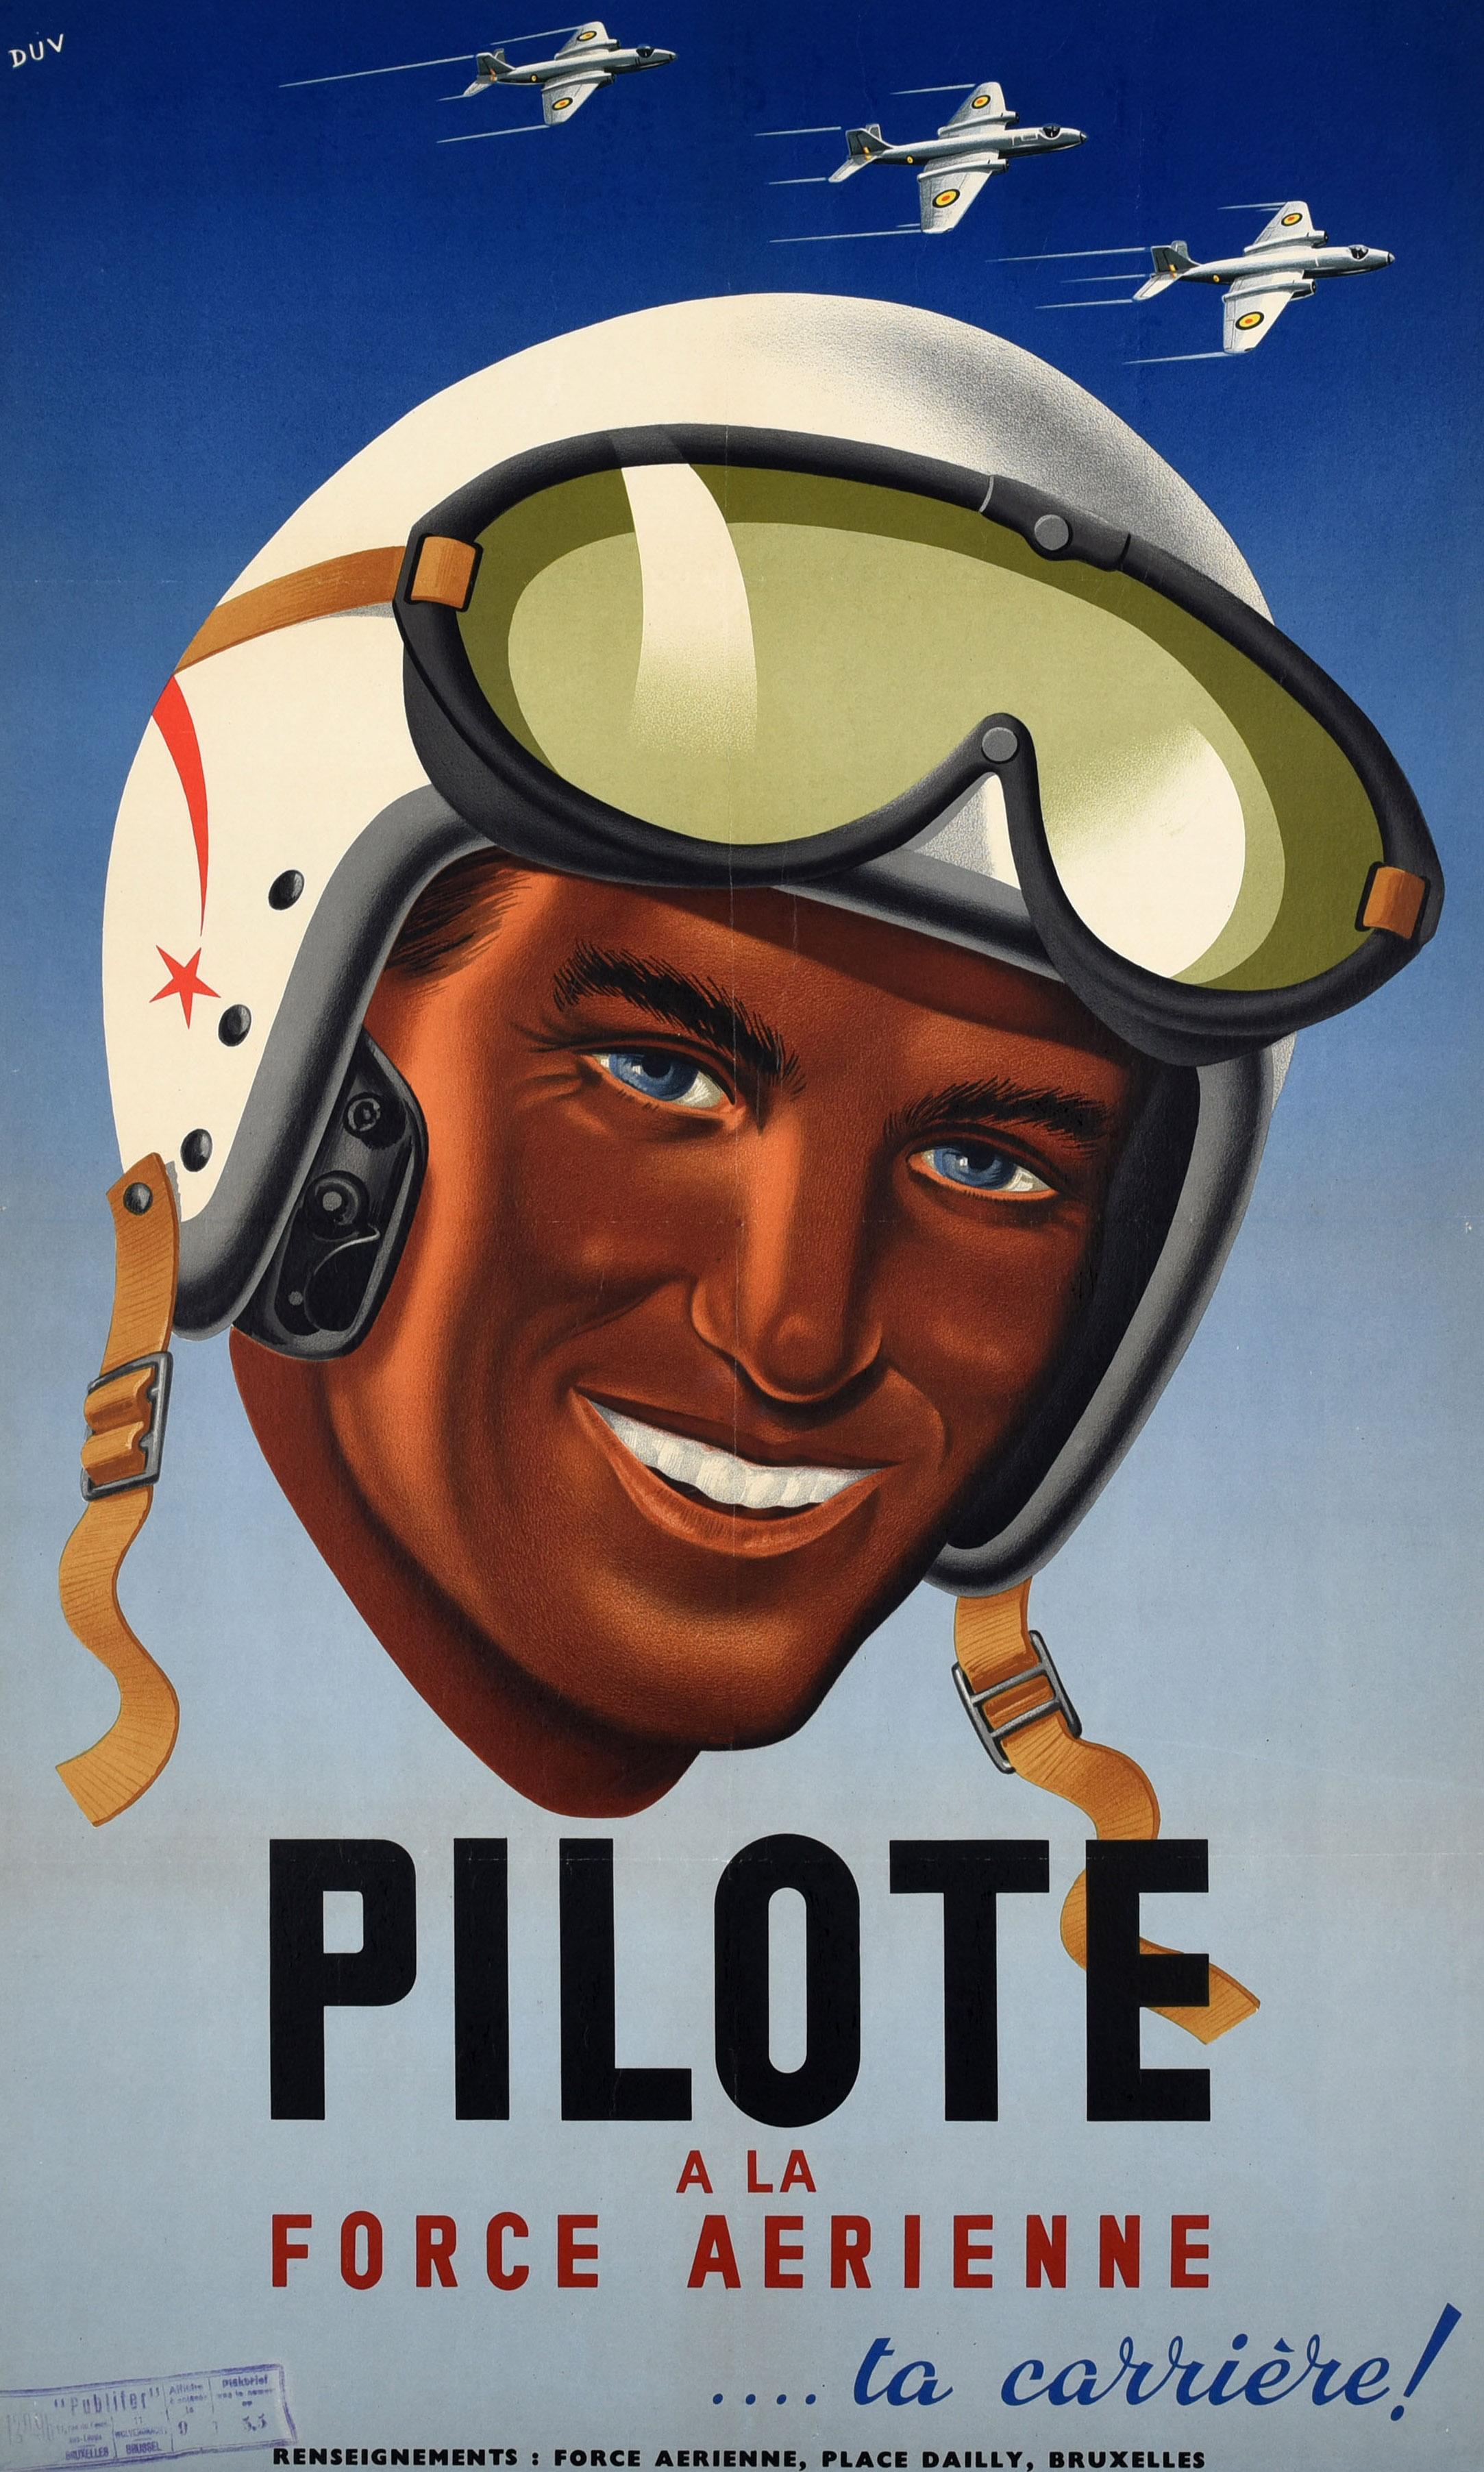 Original Vintage Recruitment Poster Air Force Pilot Belgium Force Aerienne Army - Print by Unknown